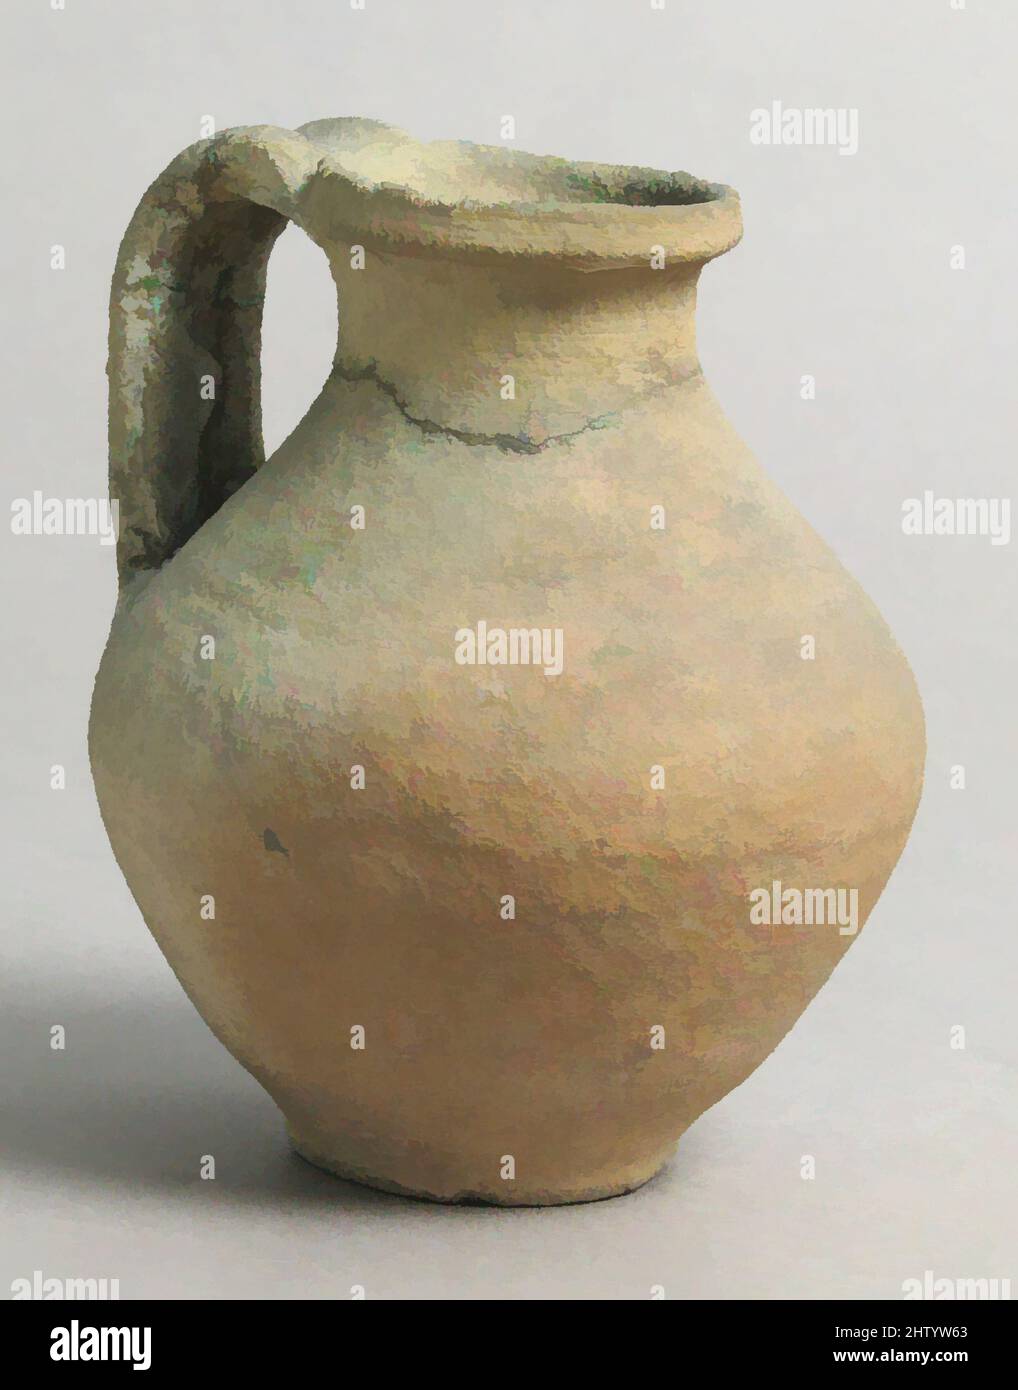 Art inspired by Jug, 15th–16th century, French, Earthenware, Overall: 4 5/16 x 3 9/16 x 3 1/2 in. (11 x 9.1 x 8.9 cm), Ceramics, Classic works modernized by Artotop with a splash of modernity. Shapes, color and value, eye-catching visual impact on art. Emotions through freedom of artworks in a contemporary way. A timeless message pursuing a wildly creative new direction. Artists turning to the digital medium and creating the Artotop NFT Stock Photo